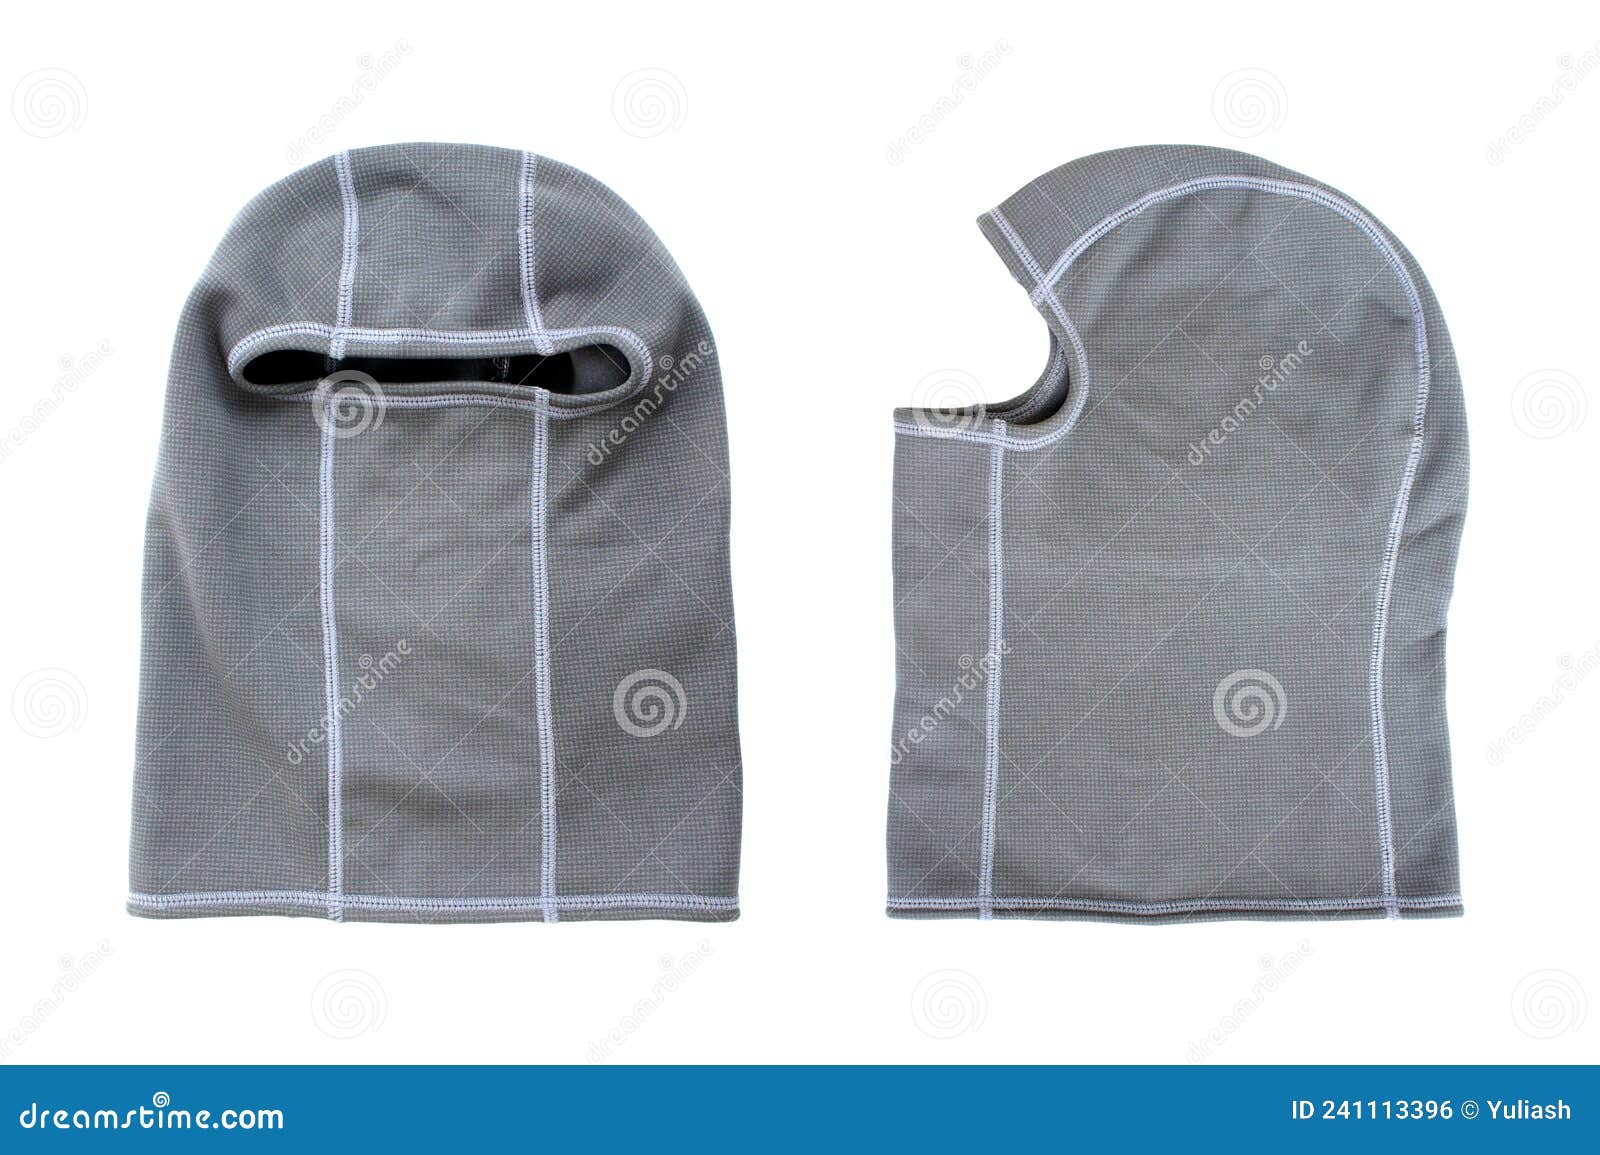 grey balaclavas  on white background. front and side view. winter sport mockup. full face mask.